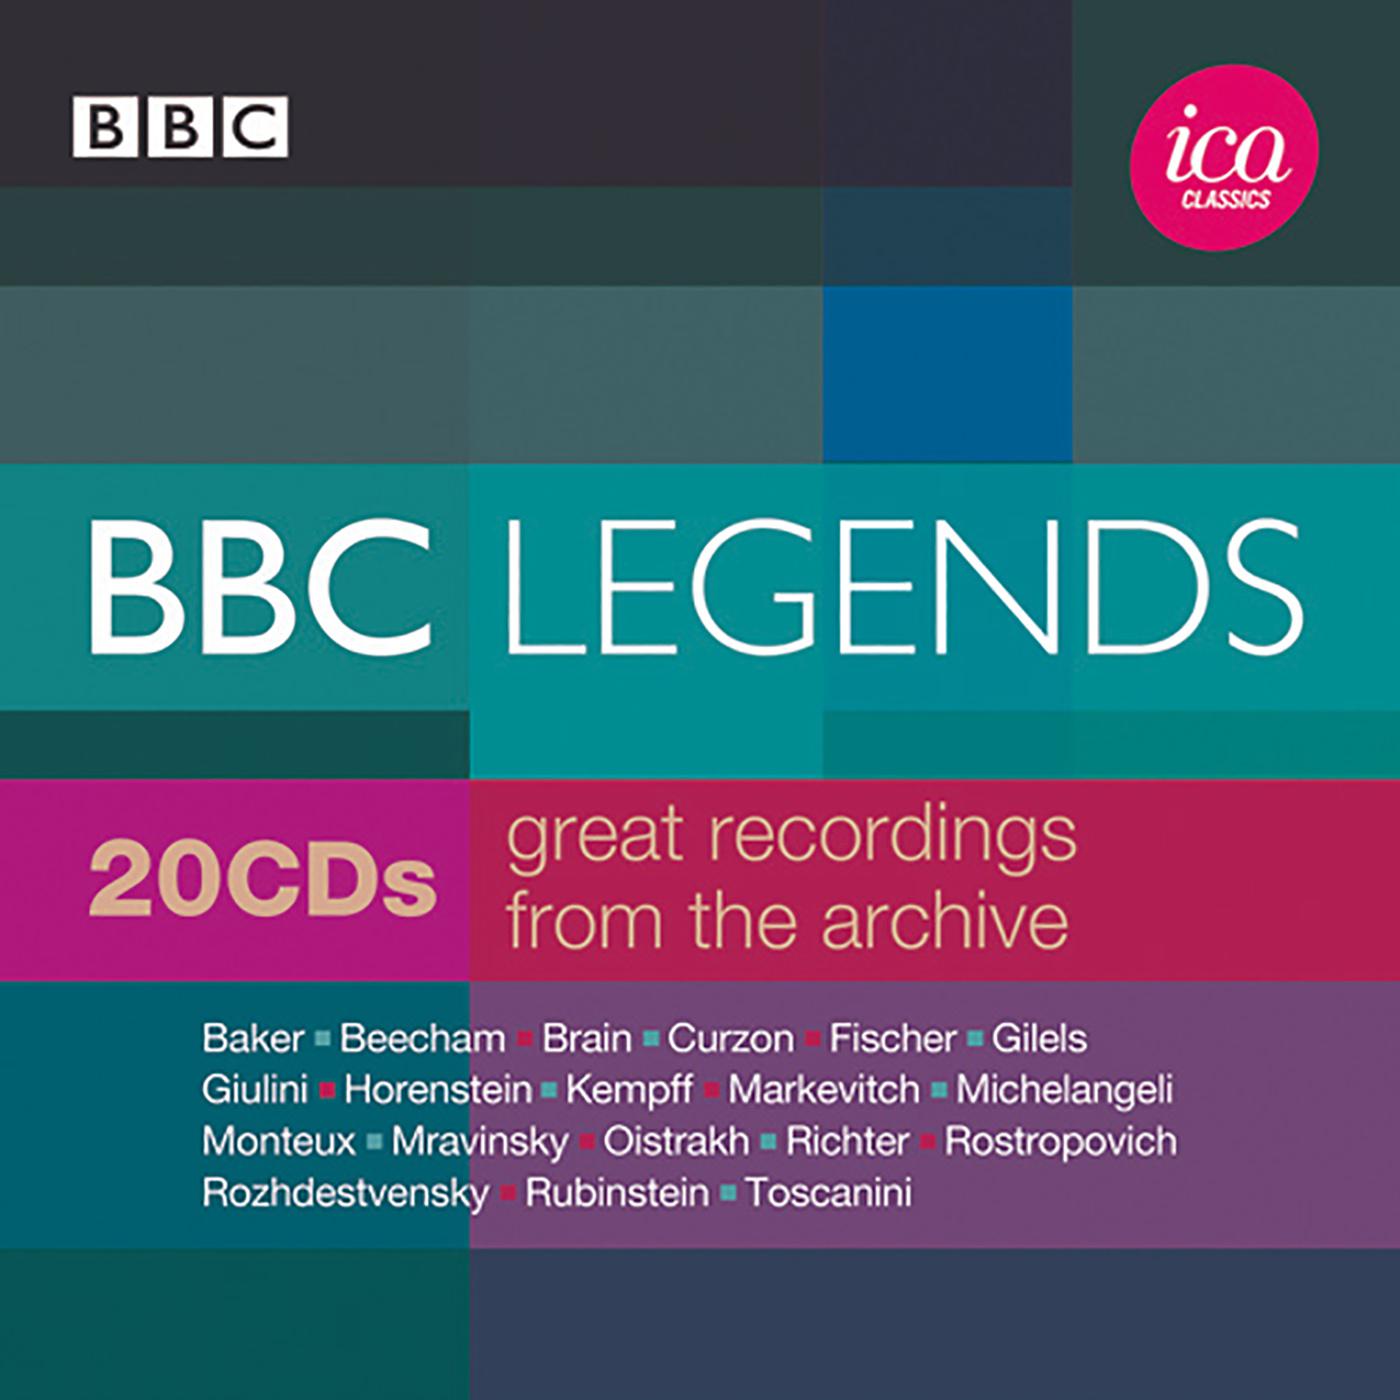 BBC LEGENDS - Great Recordings from the Archive, Vol. 1 (20 CD Box Set)